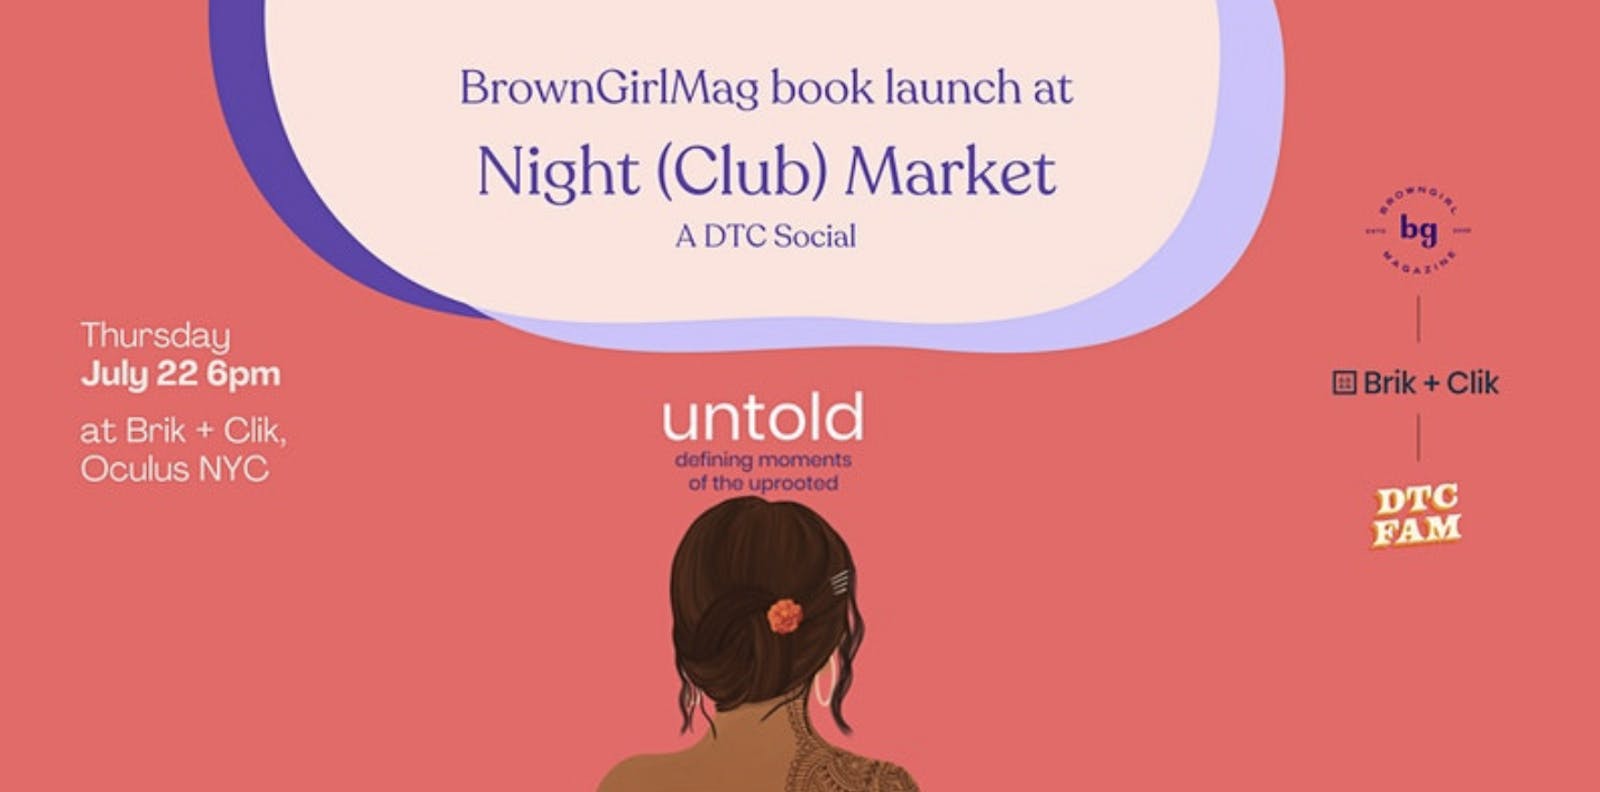 Brown Girl Magazine Book Launch at Night (Club) Market